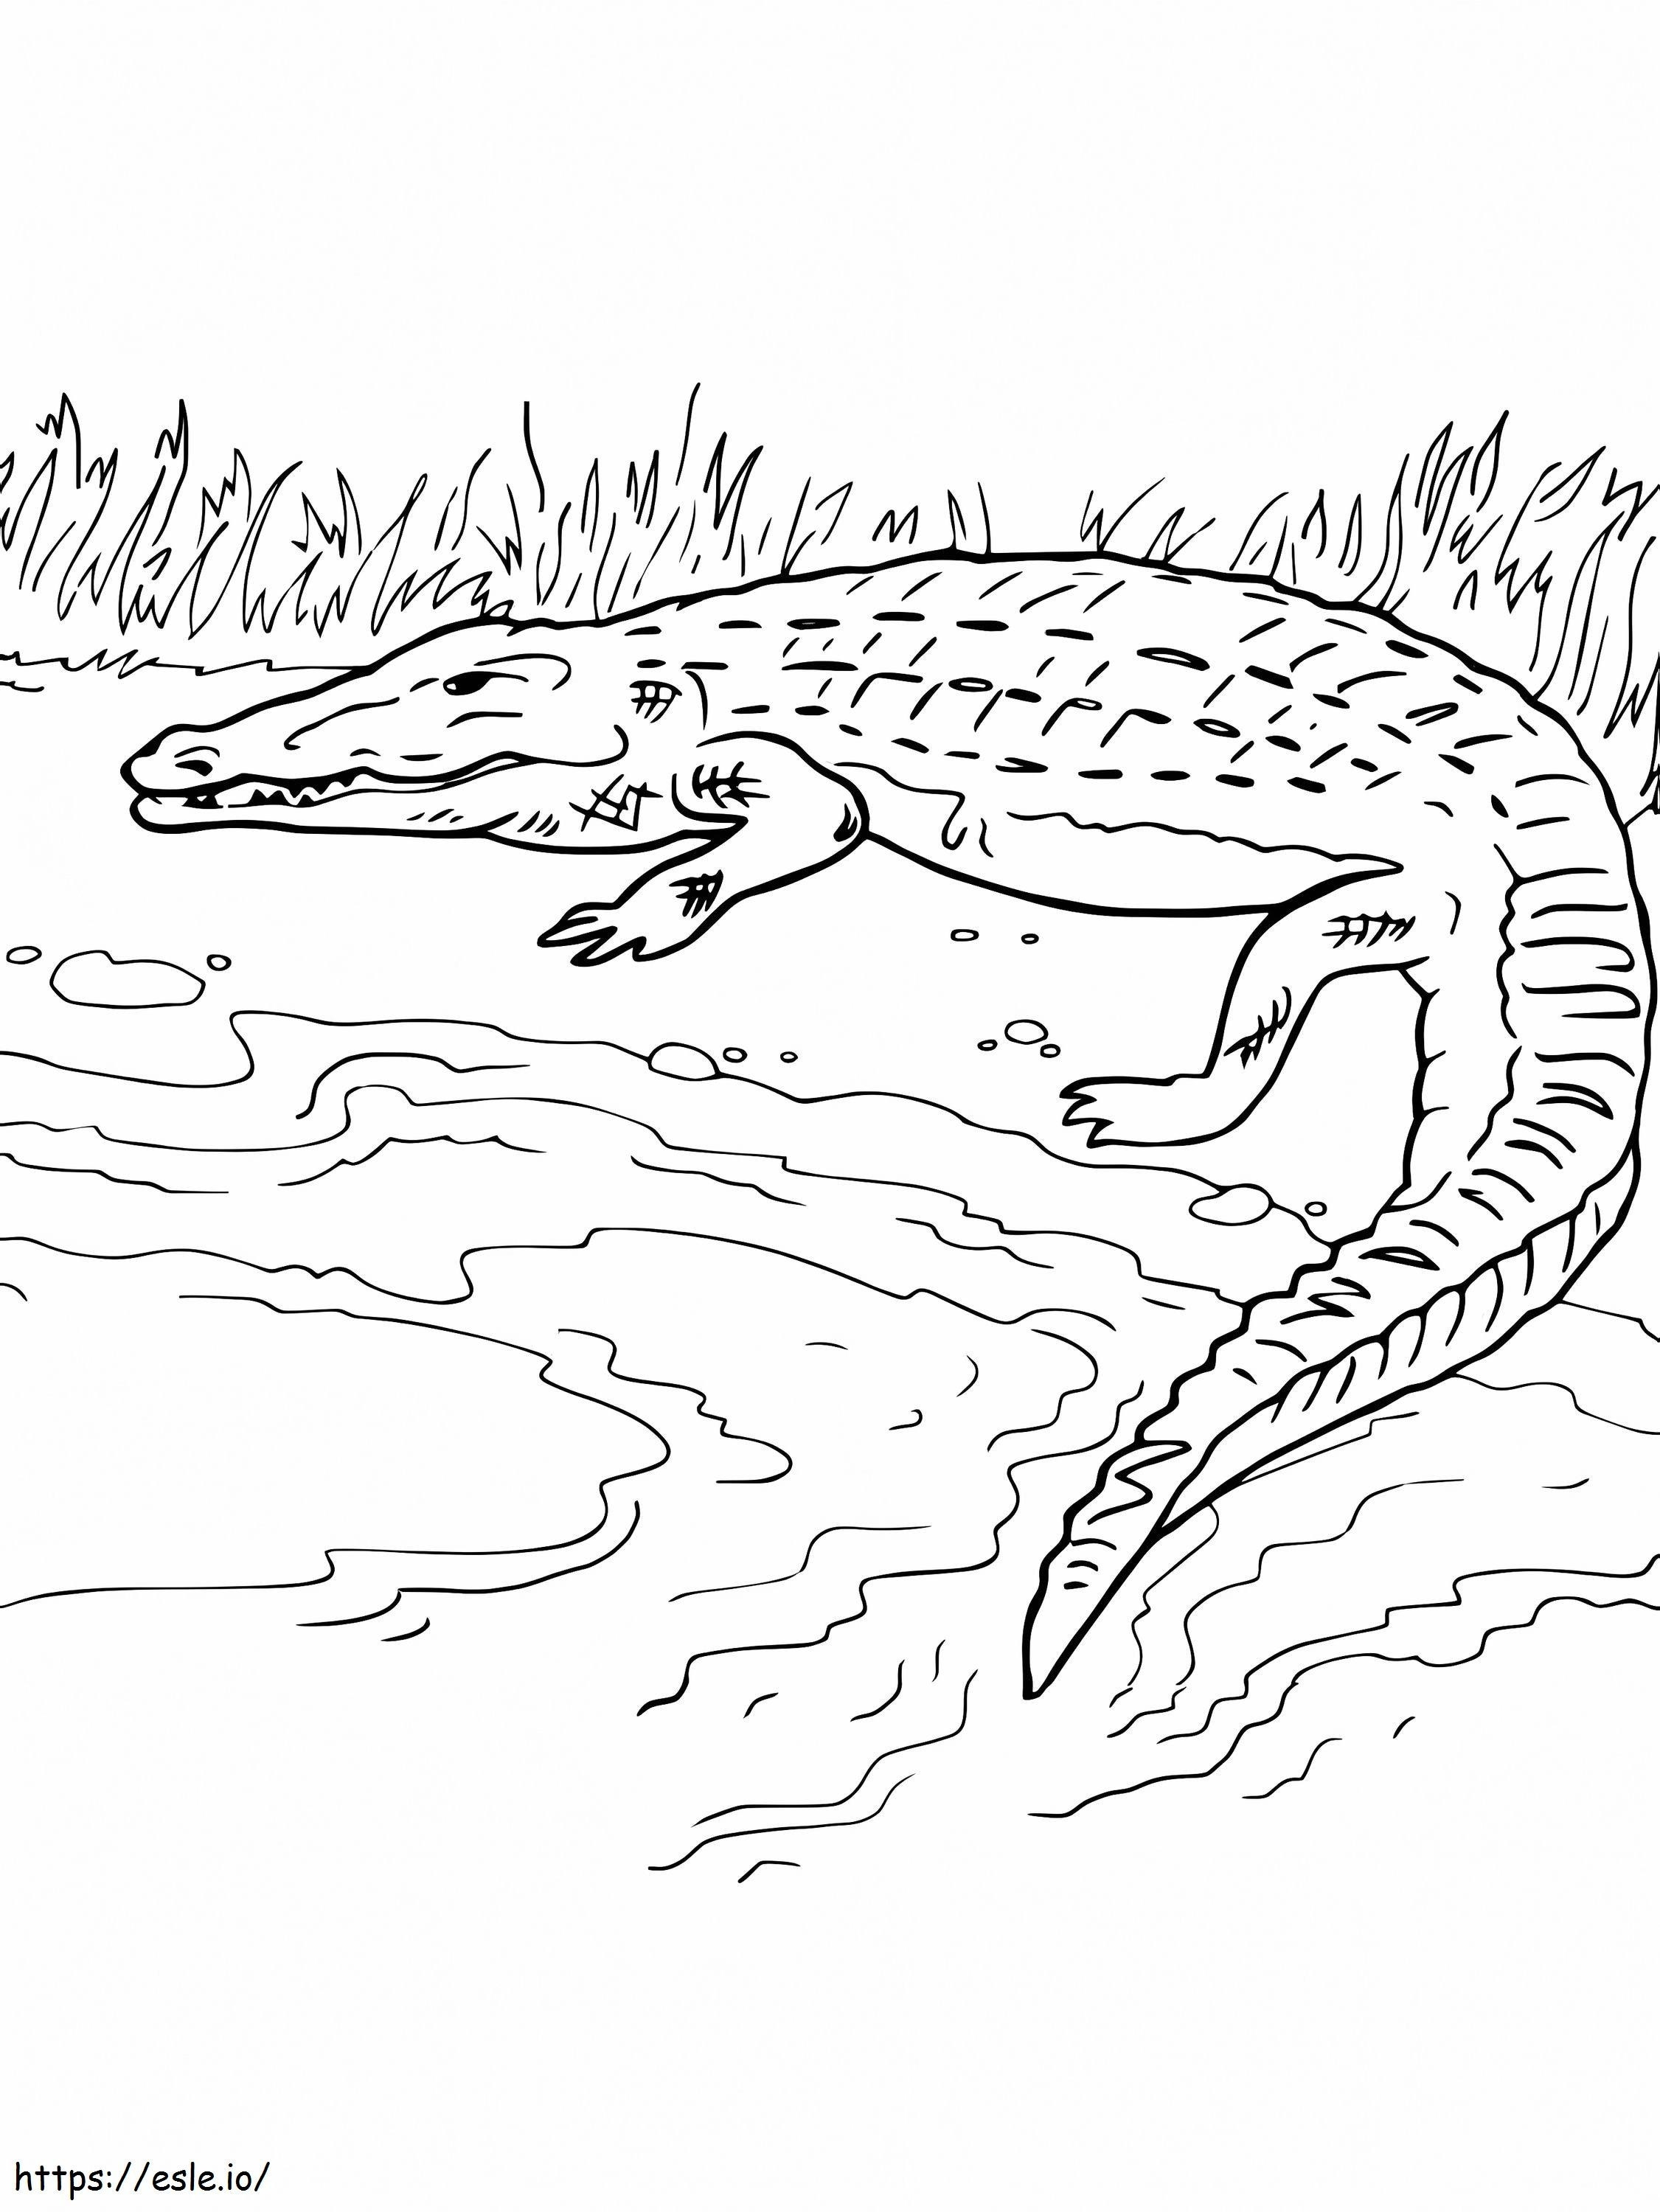 Crocodile On The Bank coloring page